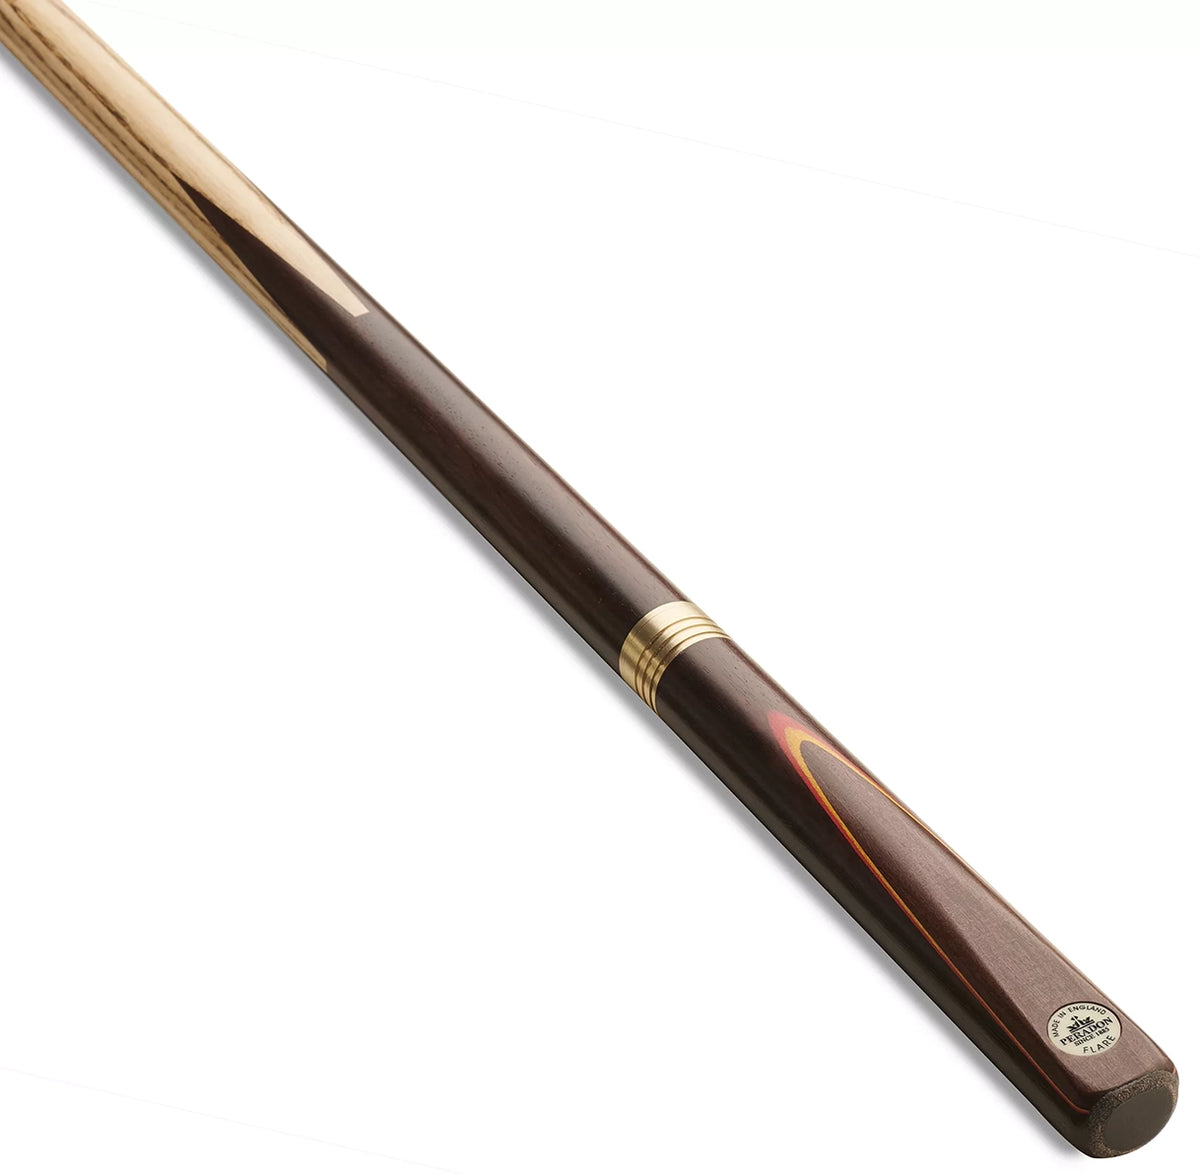 Peradon Flare 3 Section 8-Ball Pool Cue. On angle view